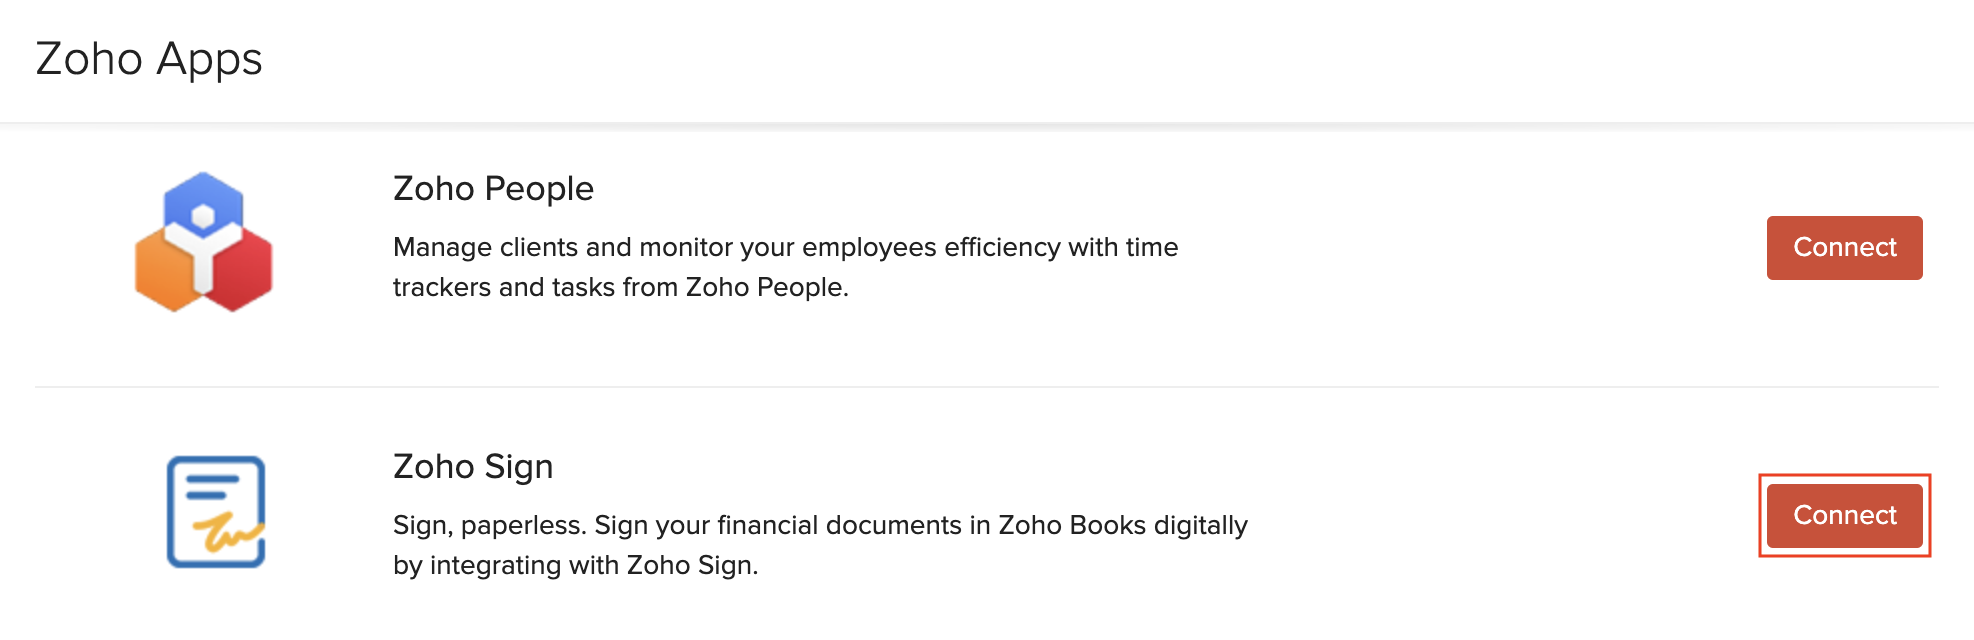 Connect to Zoho Sign